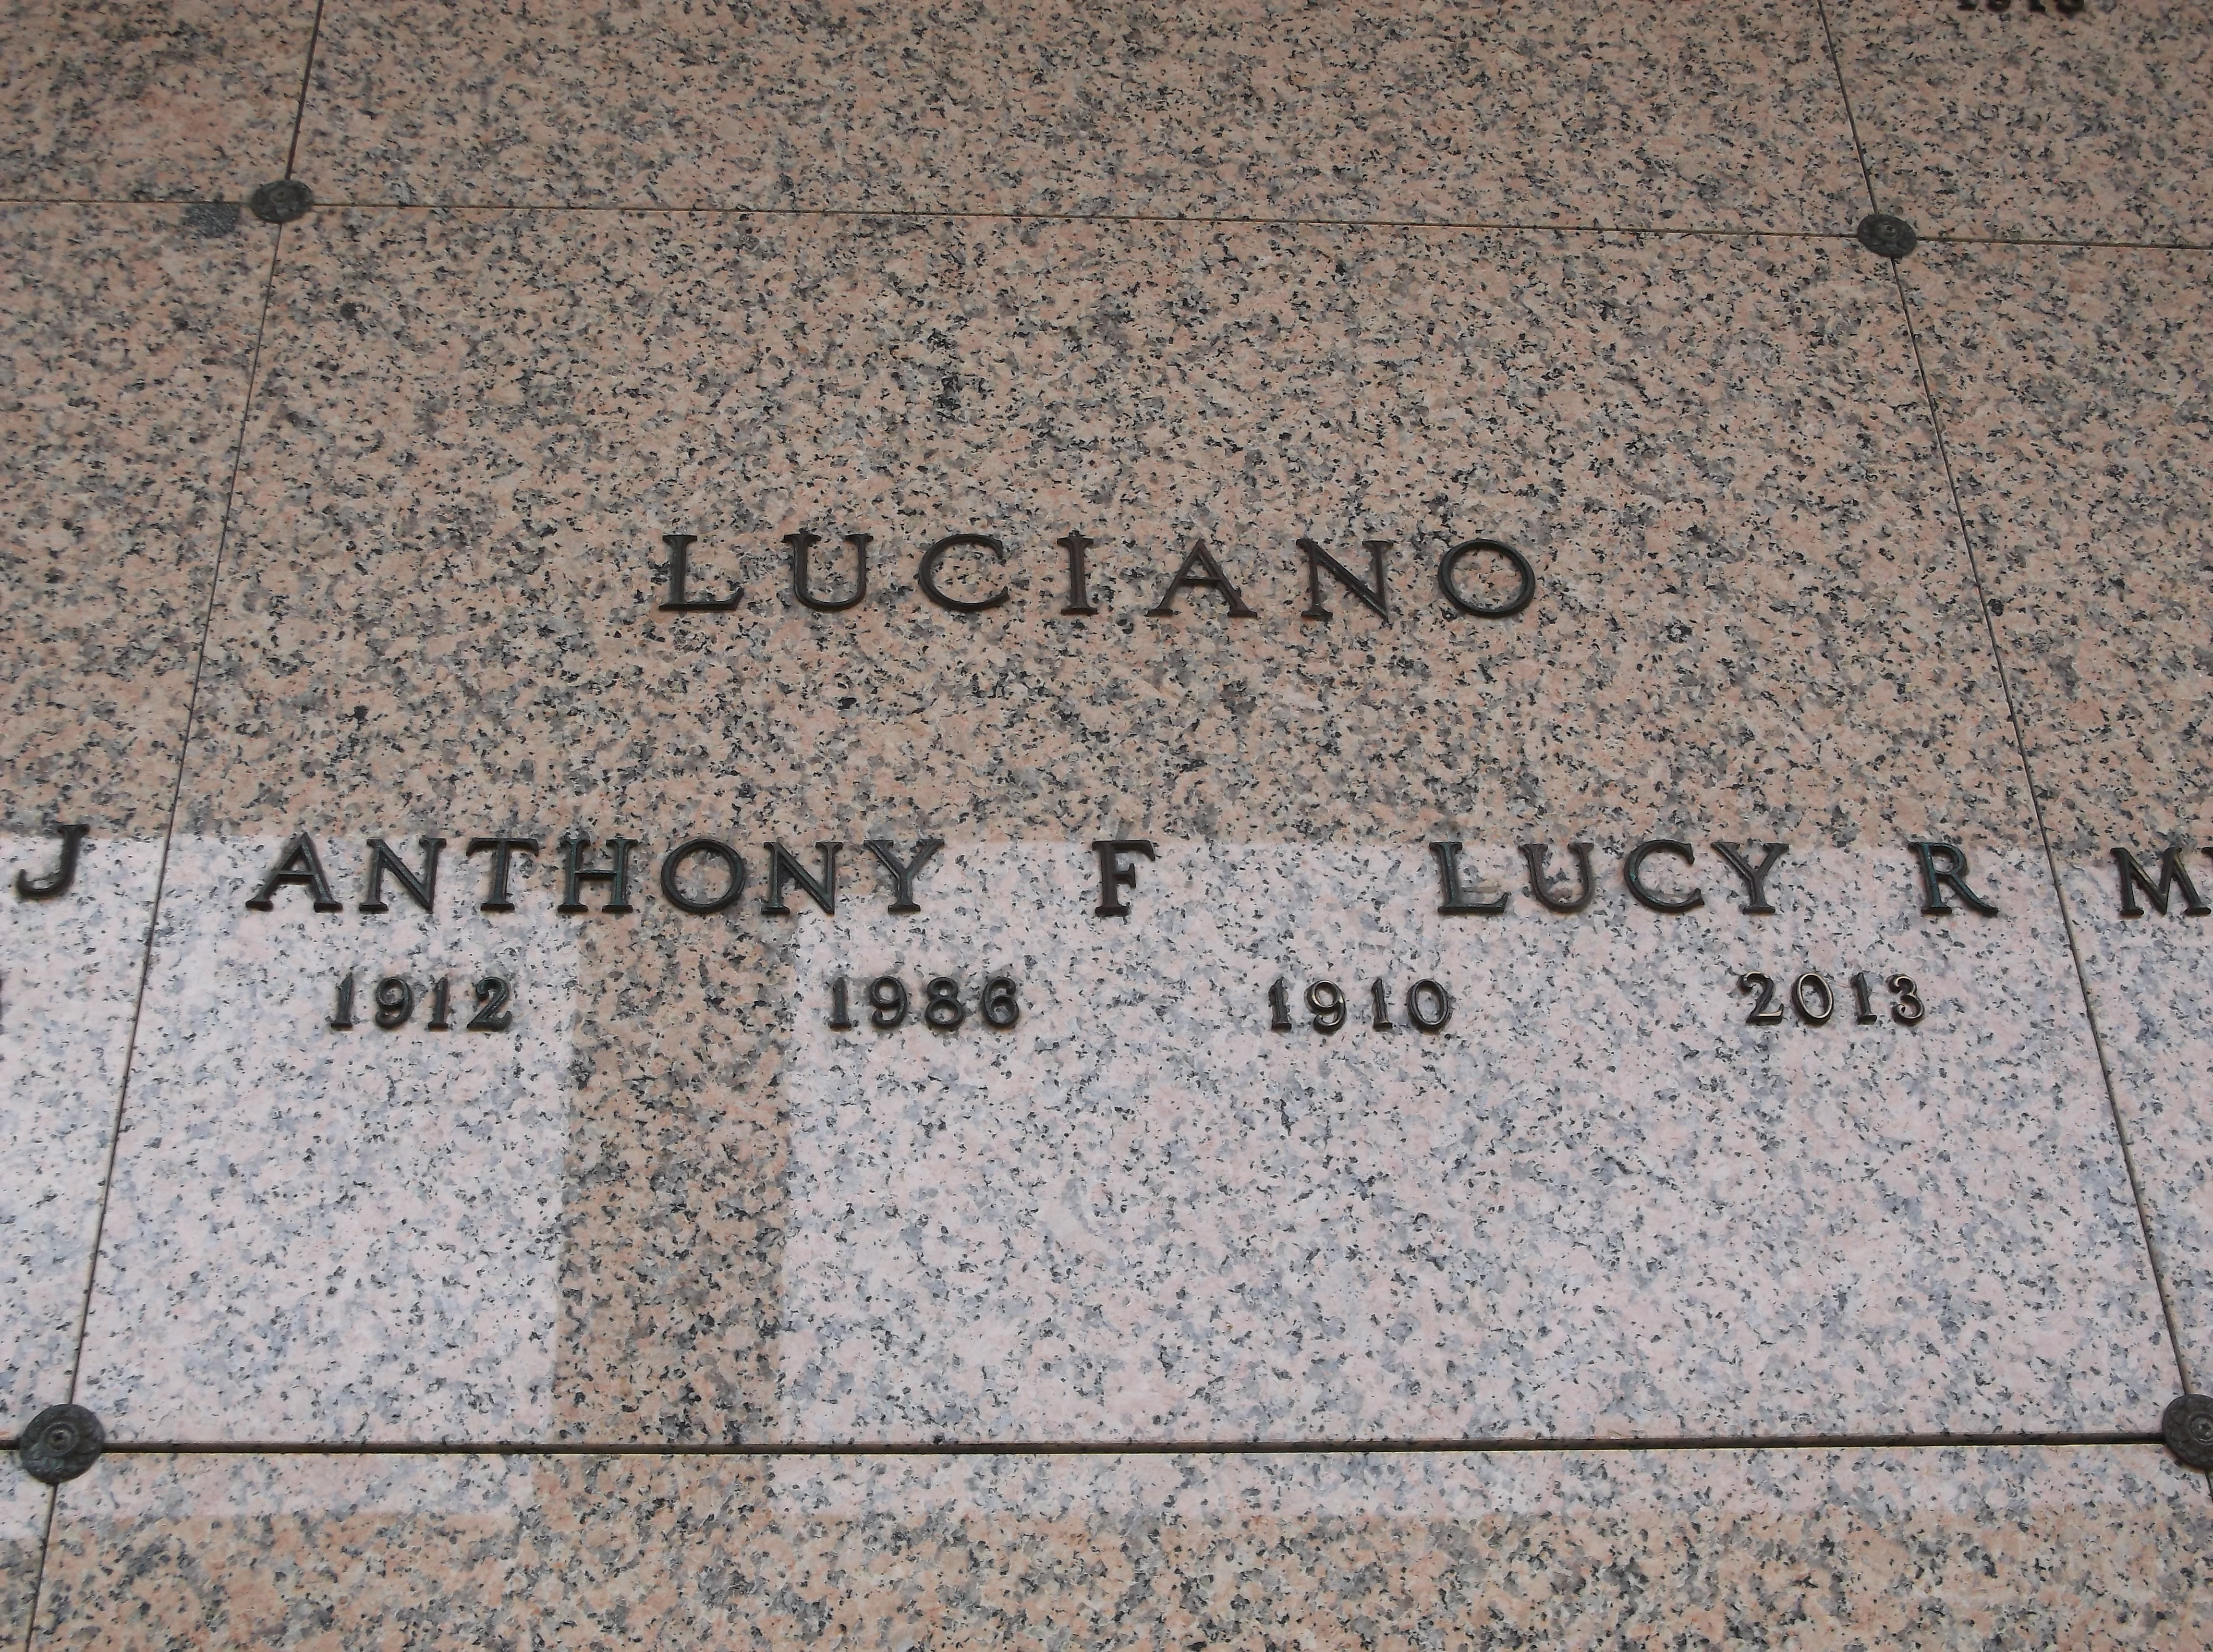 Lucy R Luciano